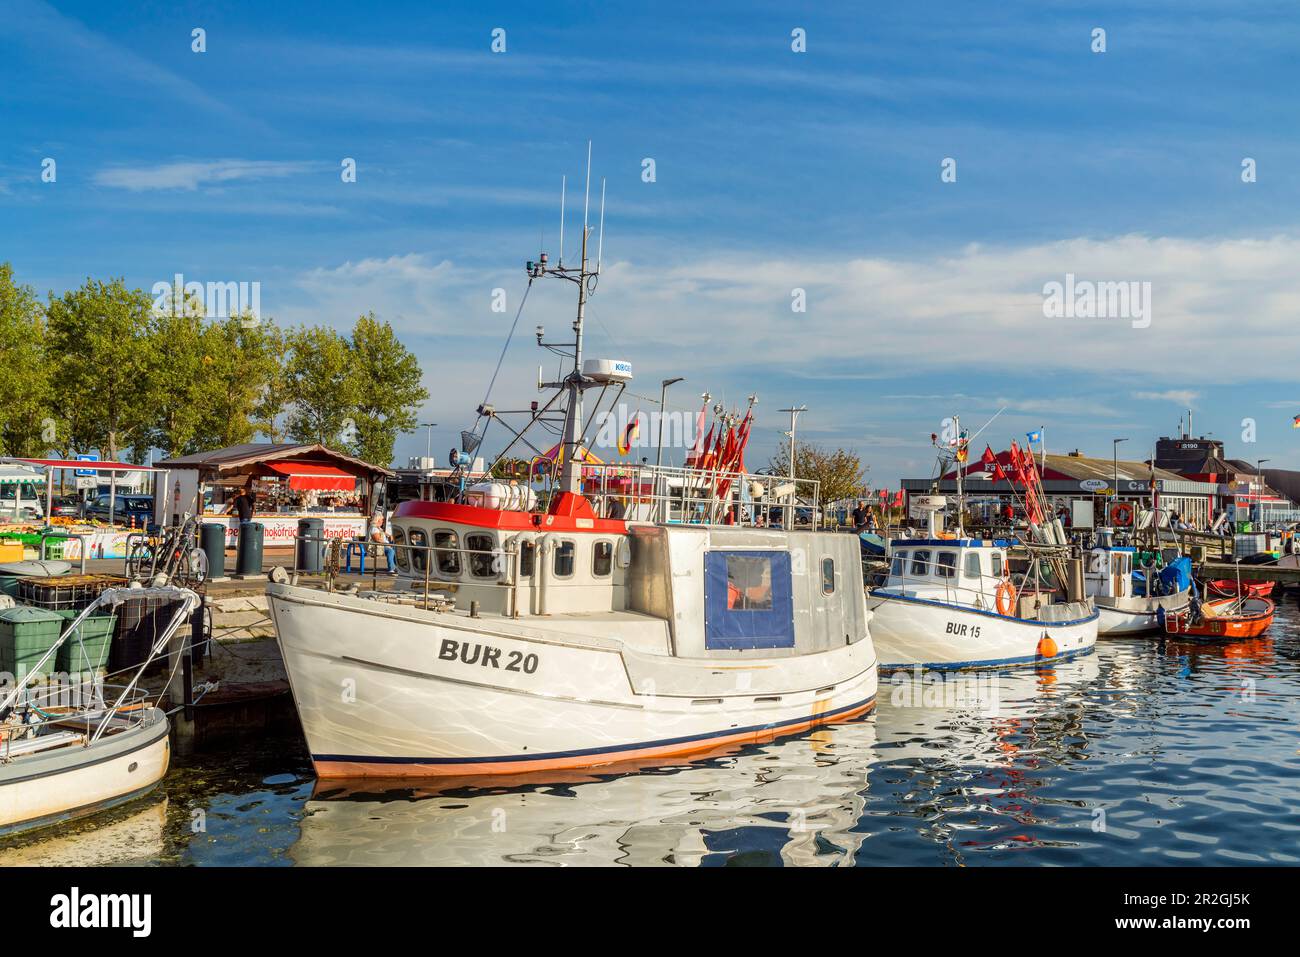 Fishing cutter in the harbour, Burgstaaken, Fehmarn Island, Schleswig-Holstein, Germany Stock Photo